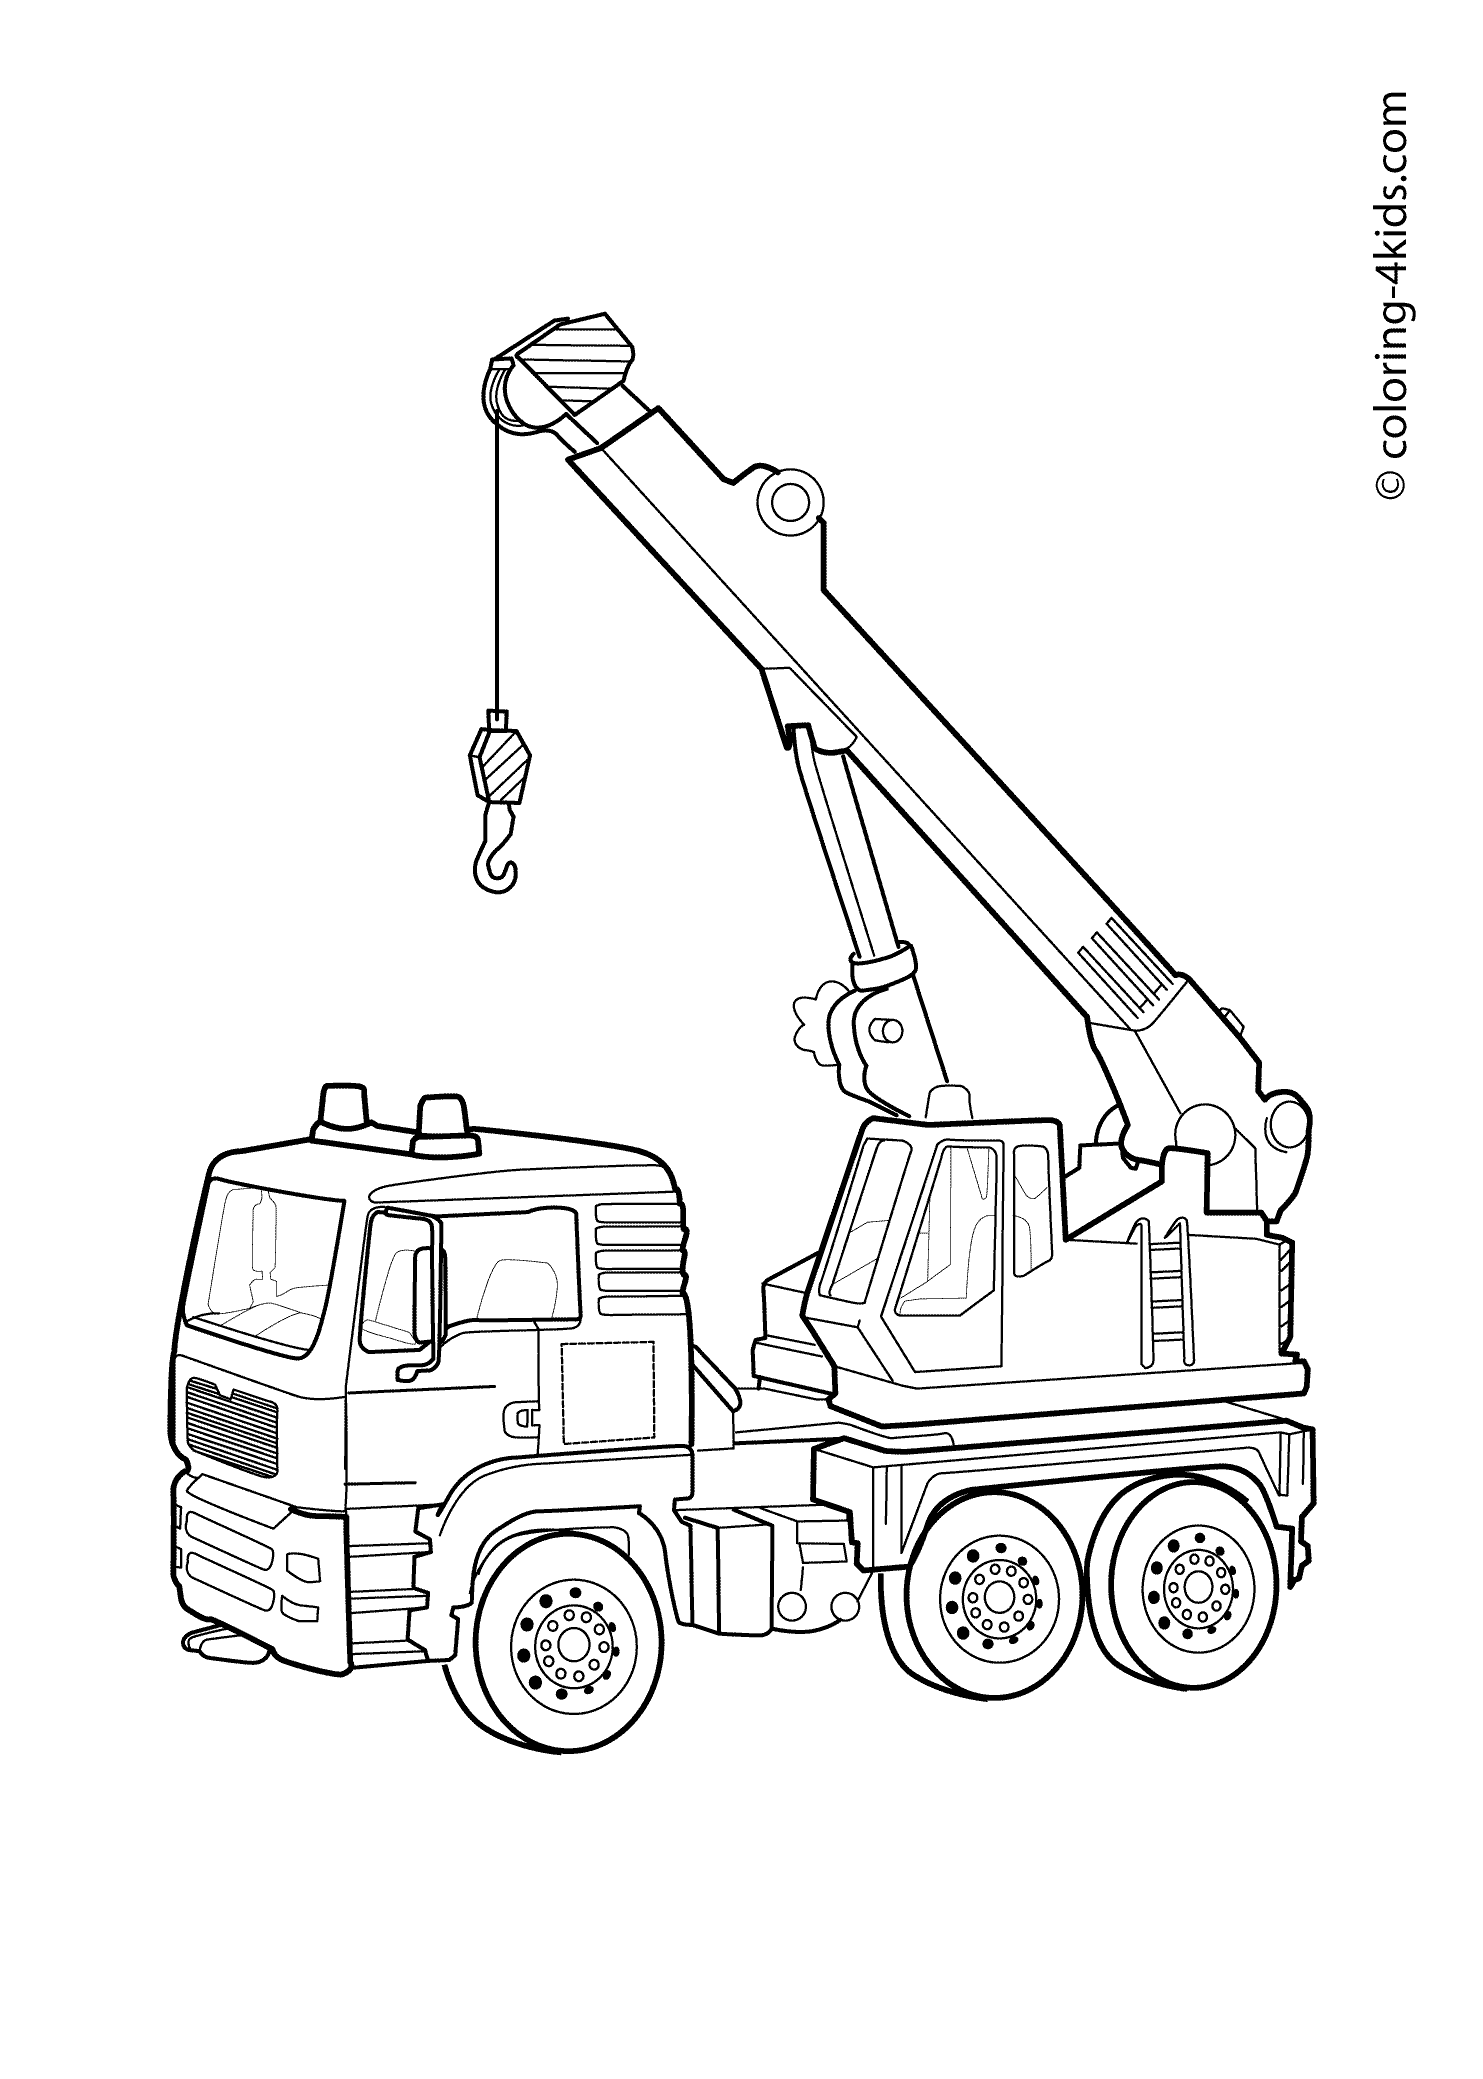 Hoisting crane Transportation Coloring page for kids, printable | Coloring  pages for kids, Truck coloring pages, Tractor coloring pages